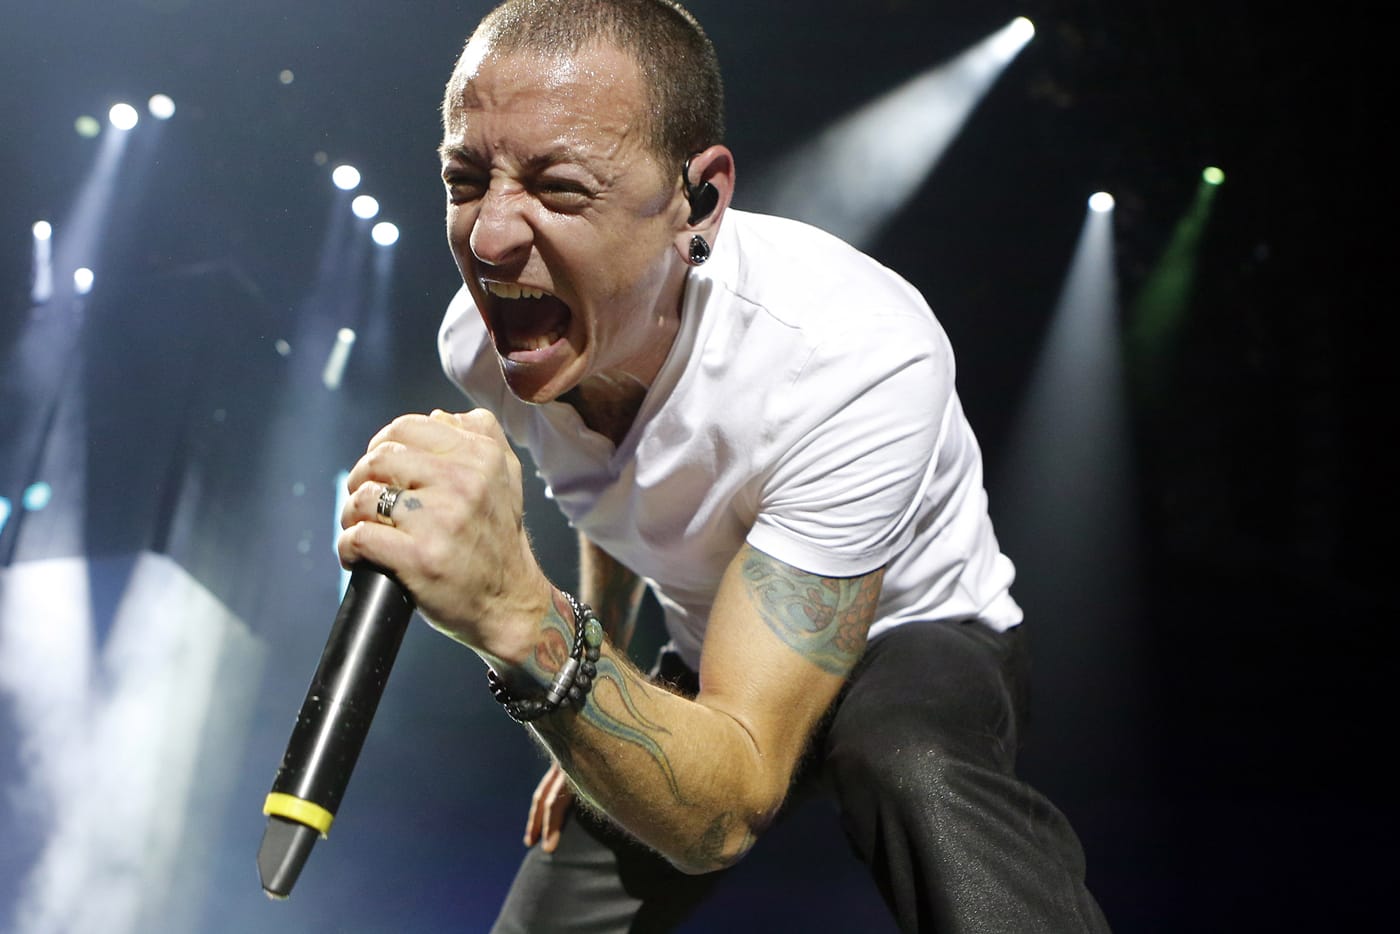 Hybrid Origins: A Look Back At The Early Days - Linkin Park Live